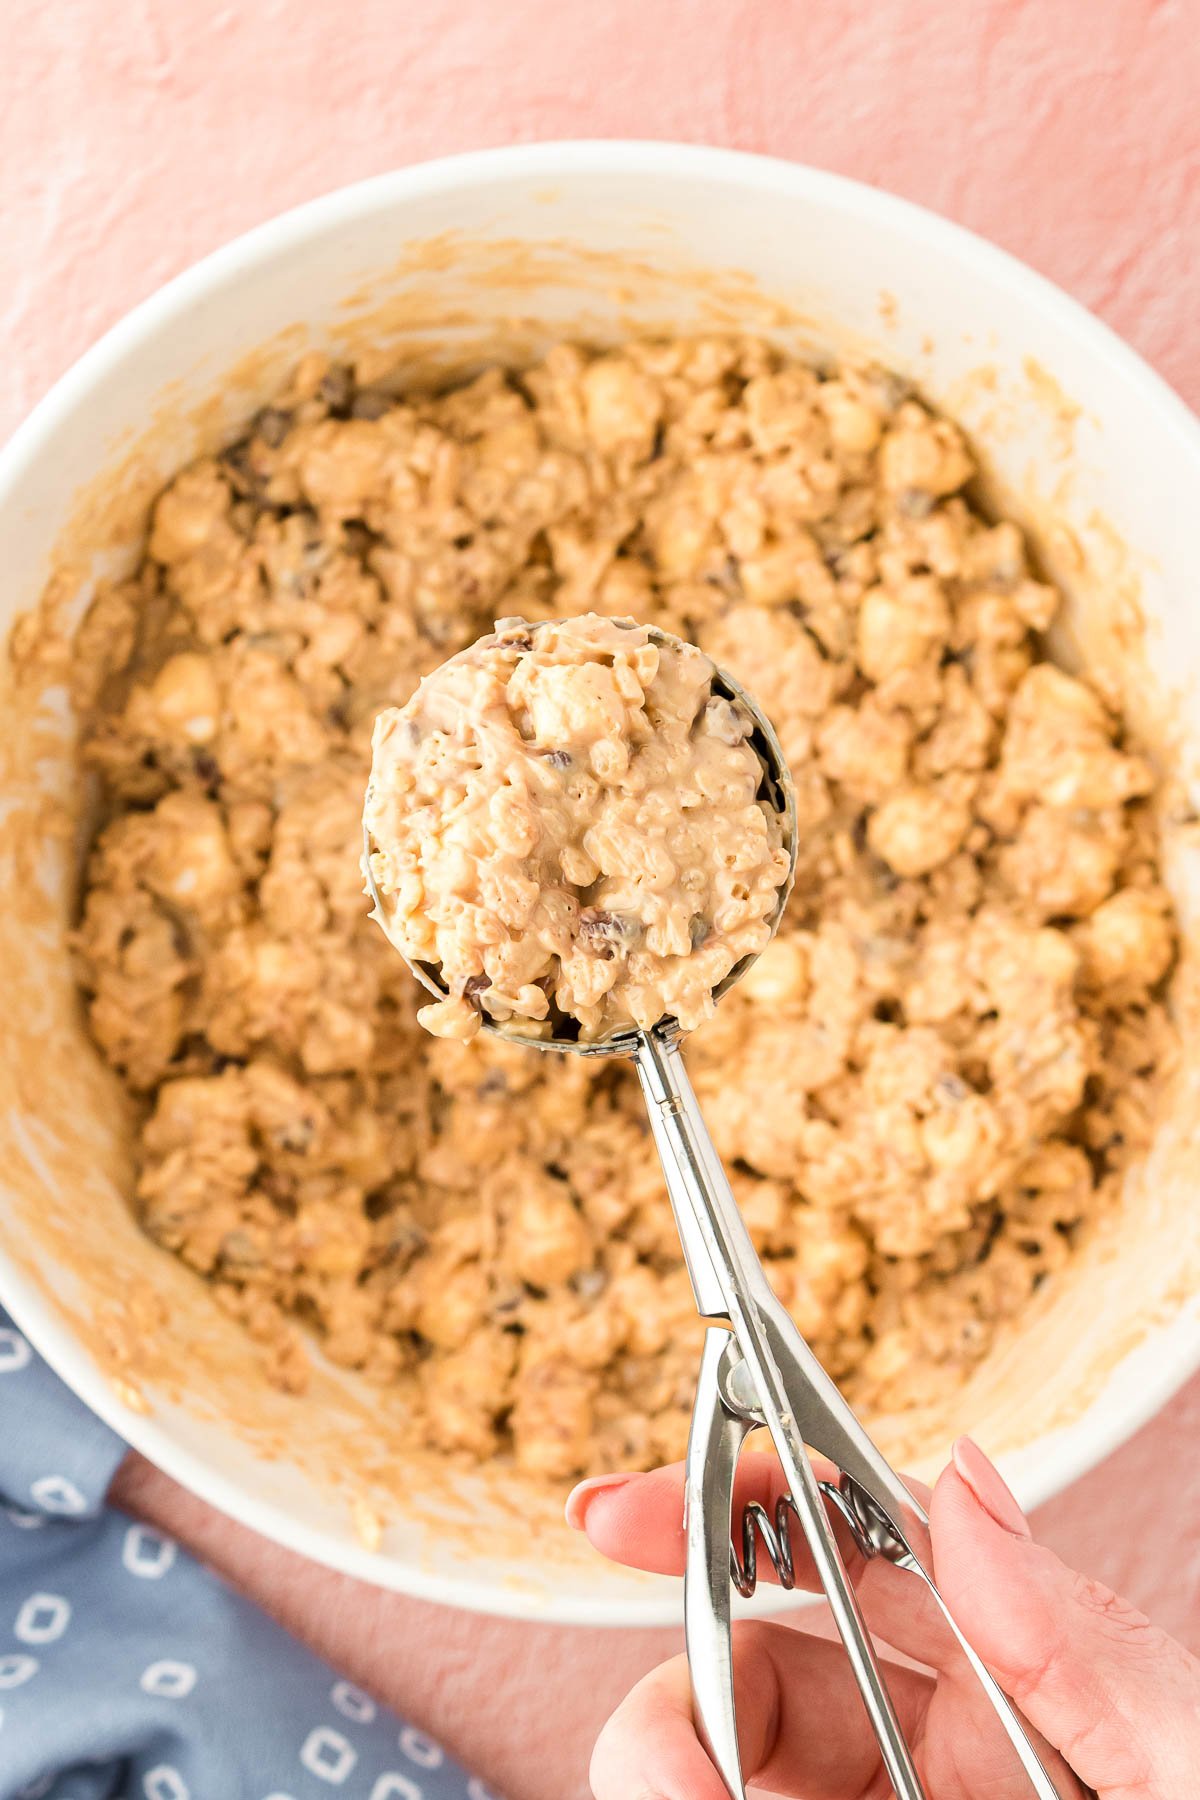 A cookie scoop scooping avalanche cookie mixture out of a bowl.